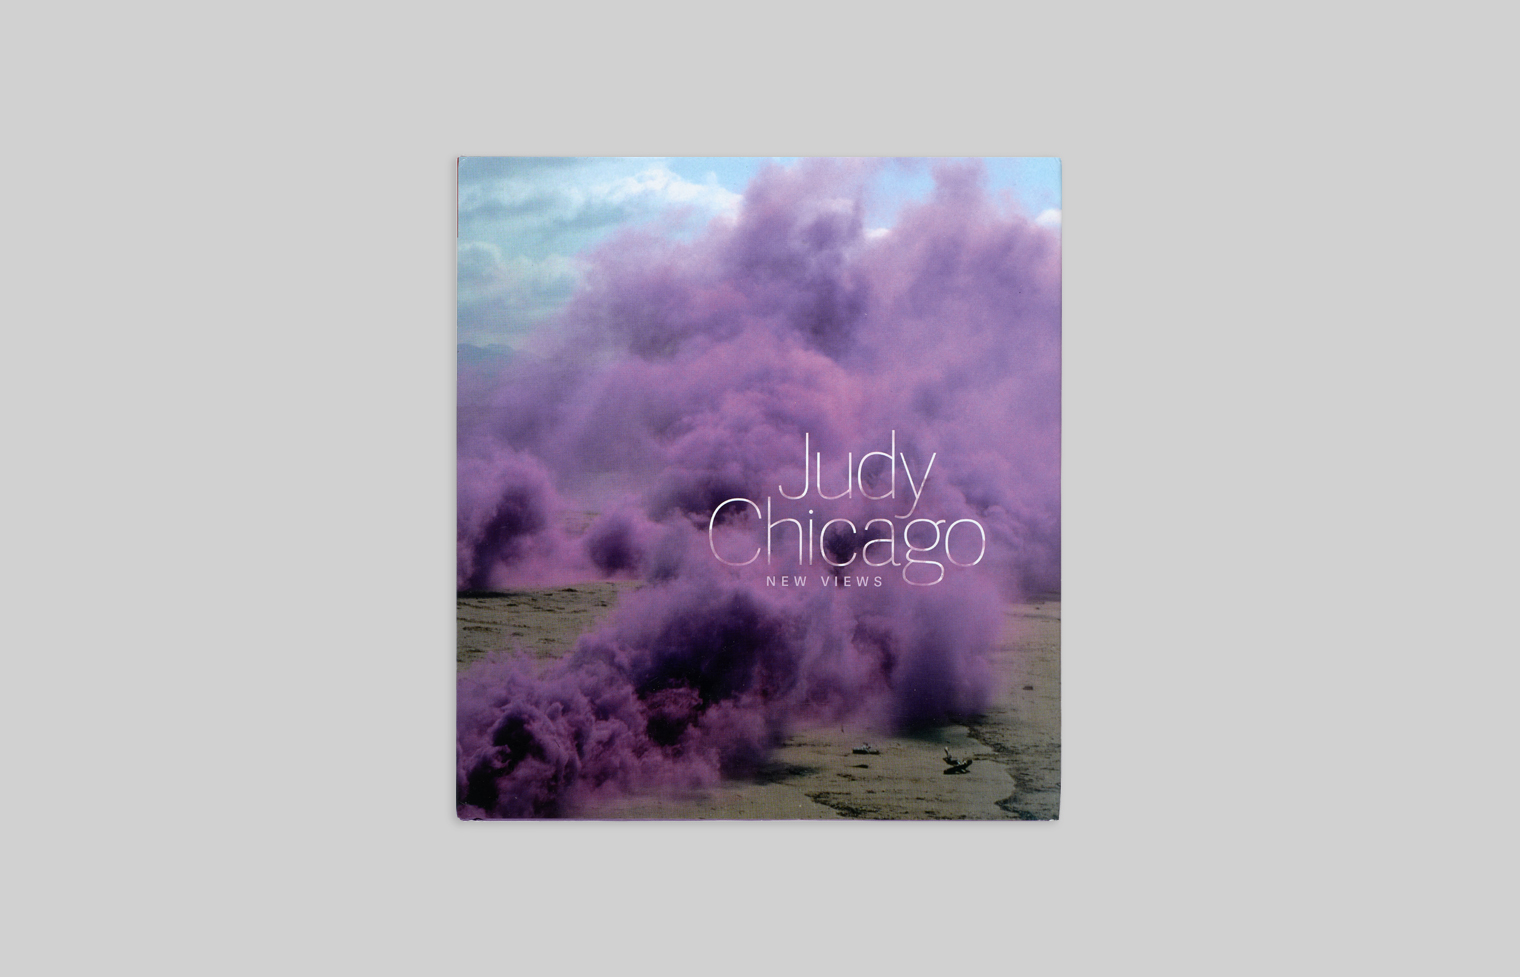 Cover of Judy Chicago: New Views has a detail from Purple Atmosphere, a fireworks performance that released a purple cloud.